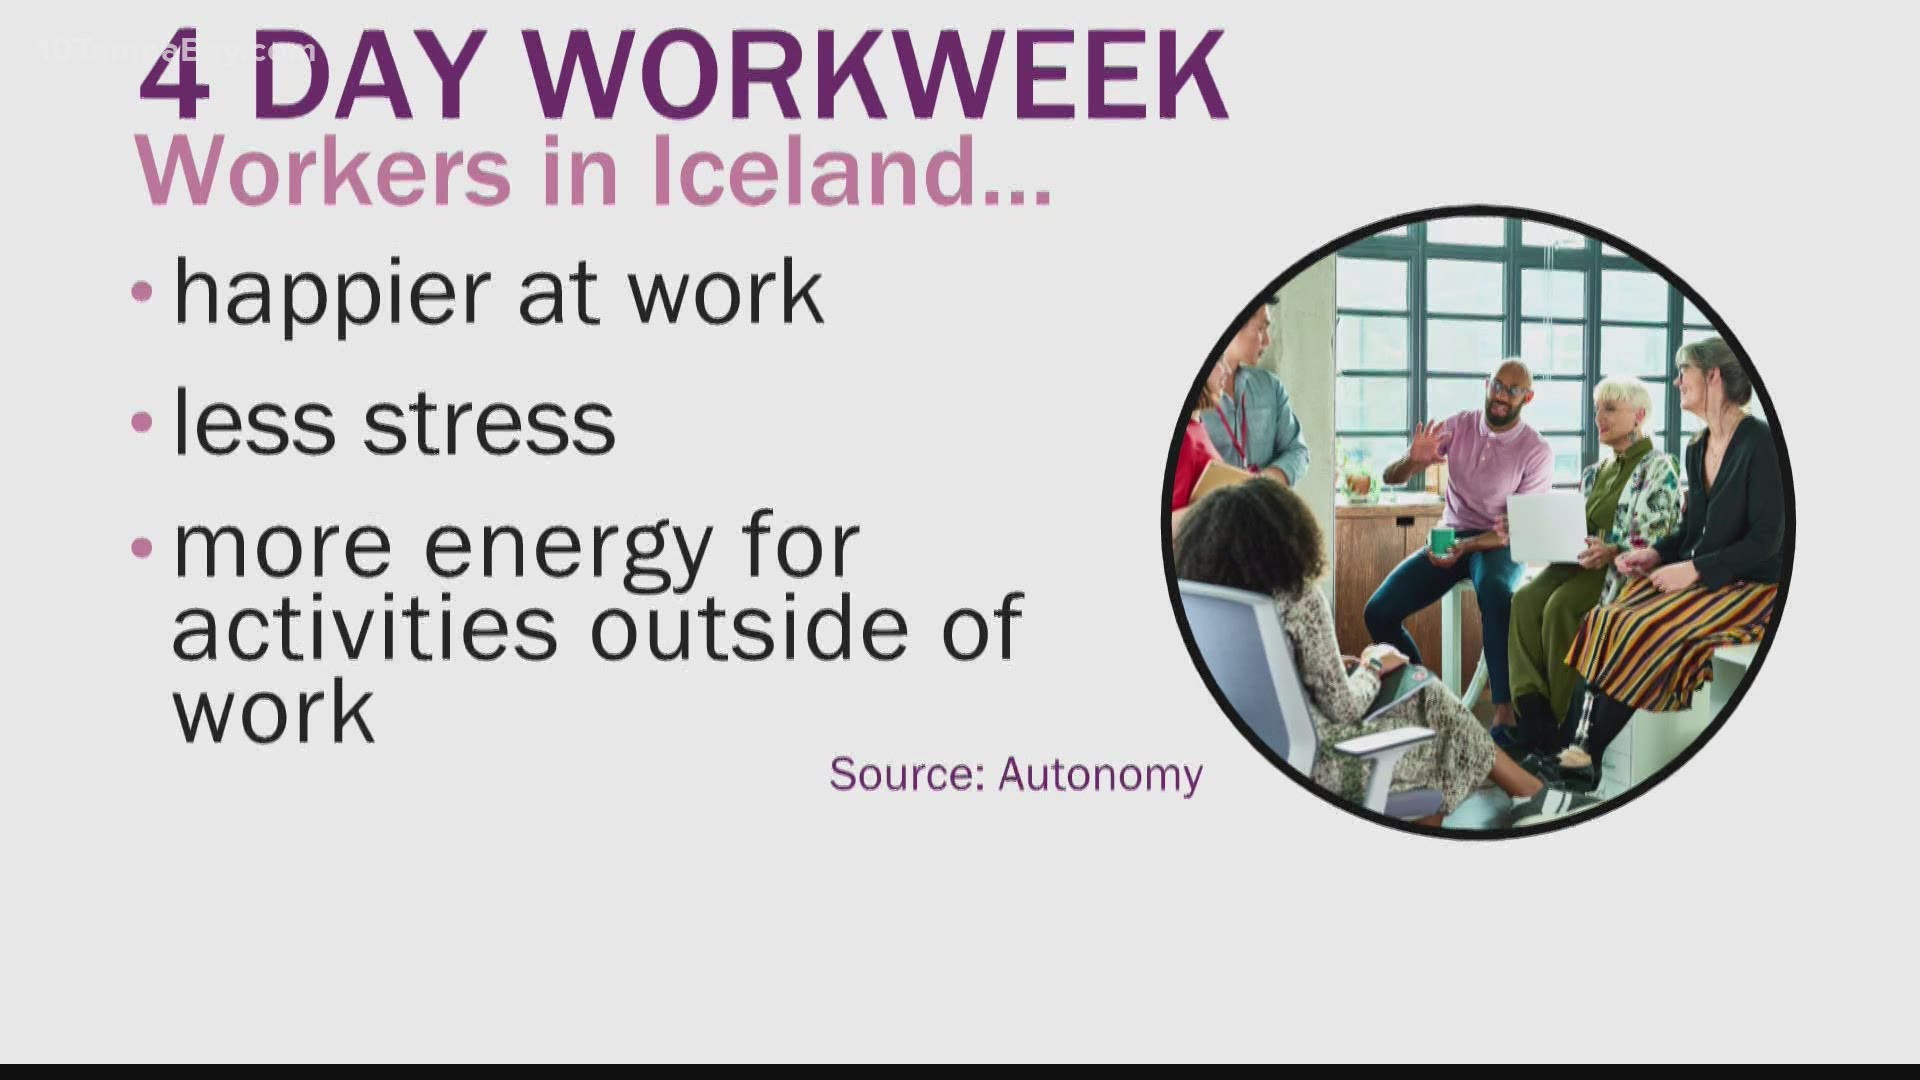 Researches in Iceland found that employees working fewer hours in a week while earning the same pay creates a better life for workers.